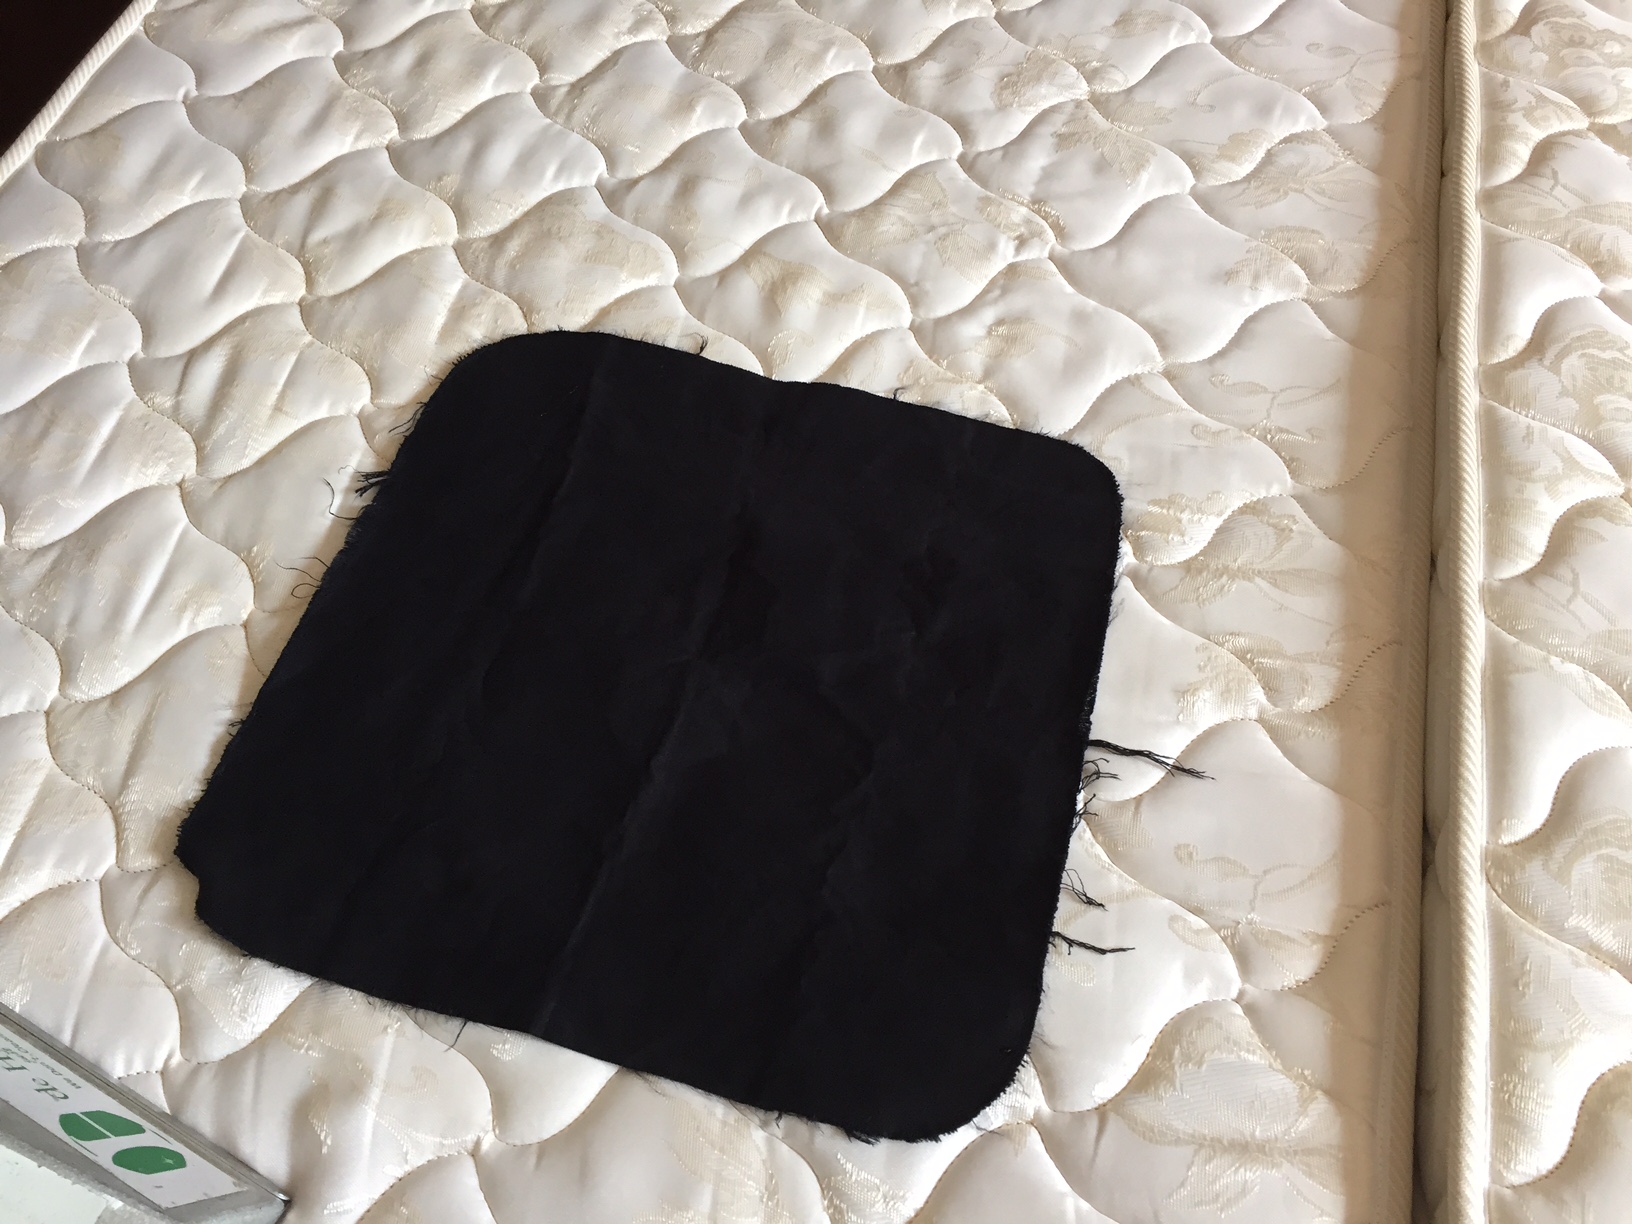 Before - a clean sheet of black cloth